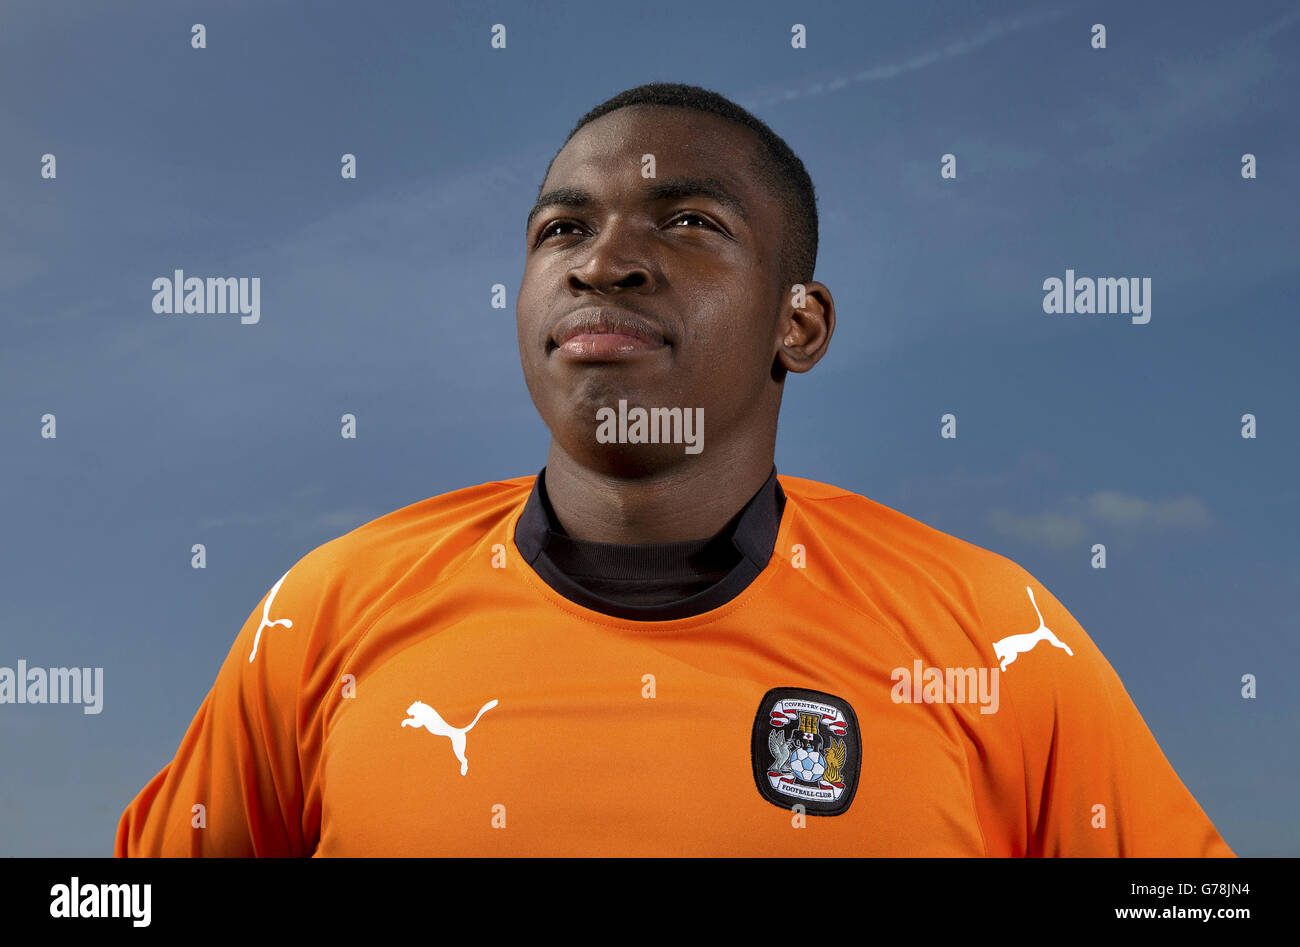 Soccer - Sky Bet League One - Coventry City Photocall 2014/15 - Ryton Training Ground. Coventry City goalkeeper Reice Charles-Cook during a feature photoshoot at Ryton Training Ground, Coventry. Stock Photo